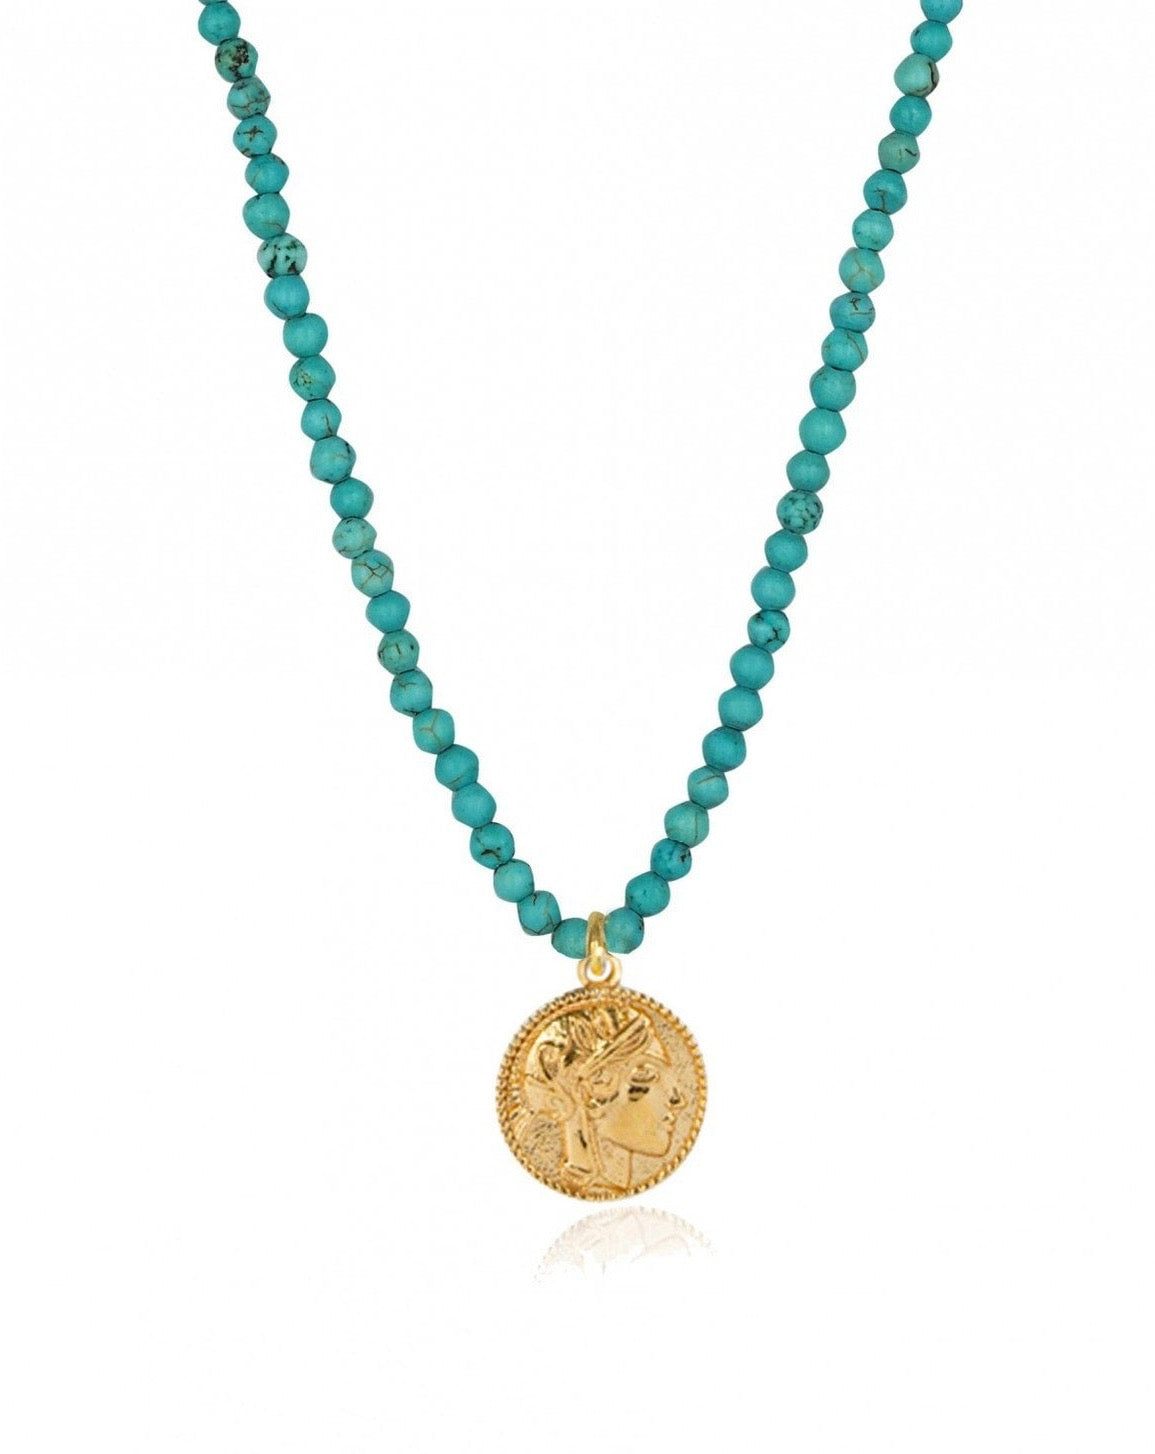 ATHÉNA TURQUOISE NECKLACE